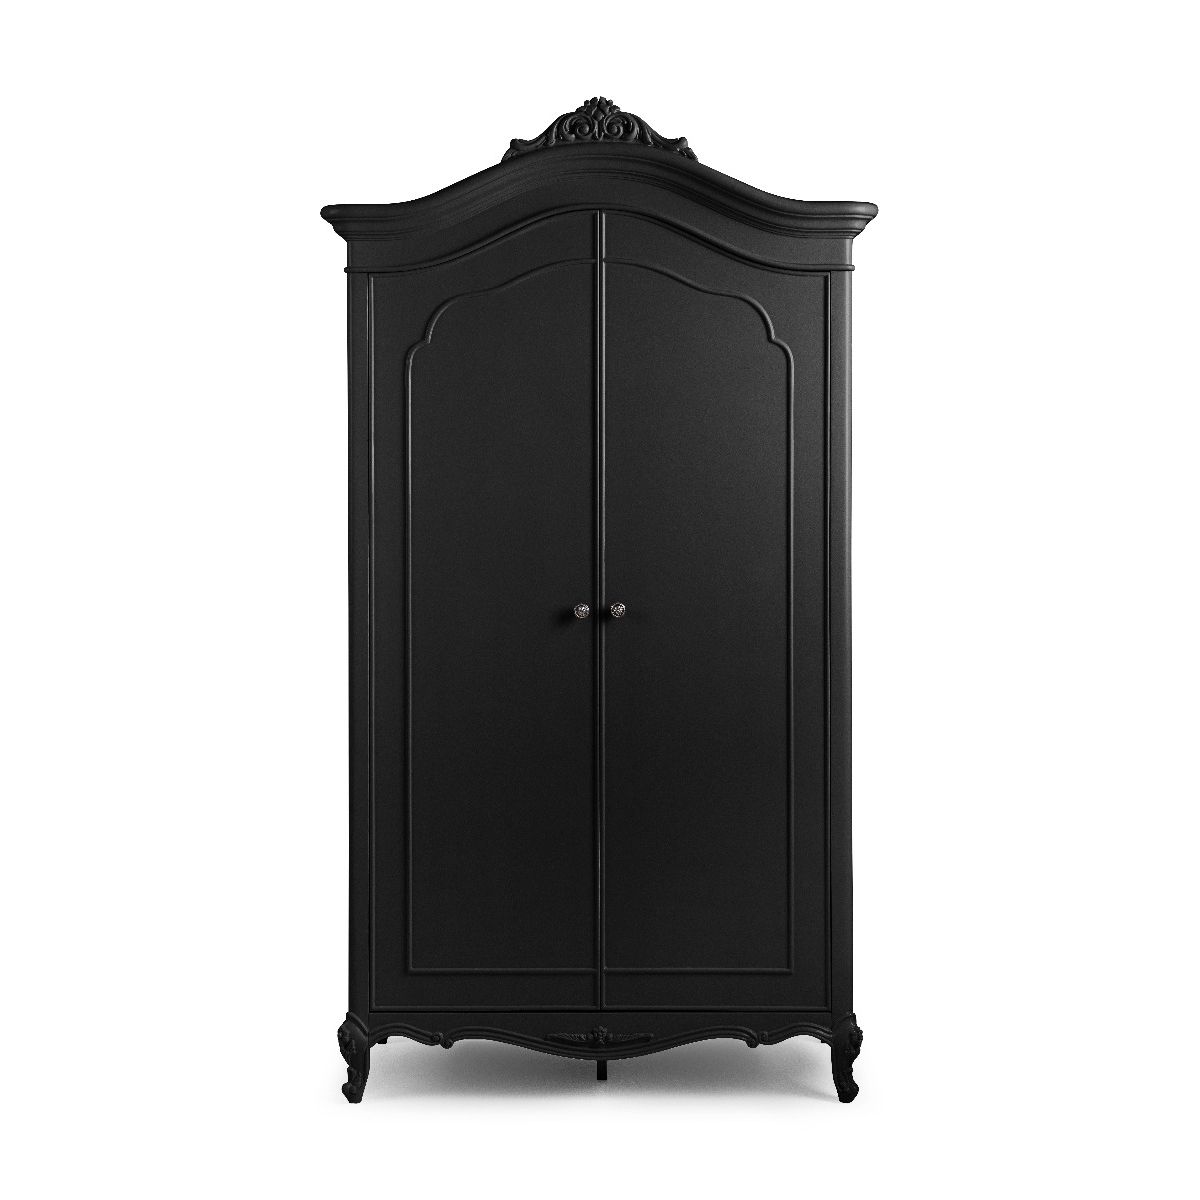 Rochelle Noir 2 Door French Armoire | French Bedroom Furniture – French  Style Wardrobes Pertaining To Black French Style Wardrobes (Gallery 1 of 20)